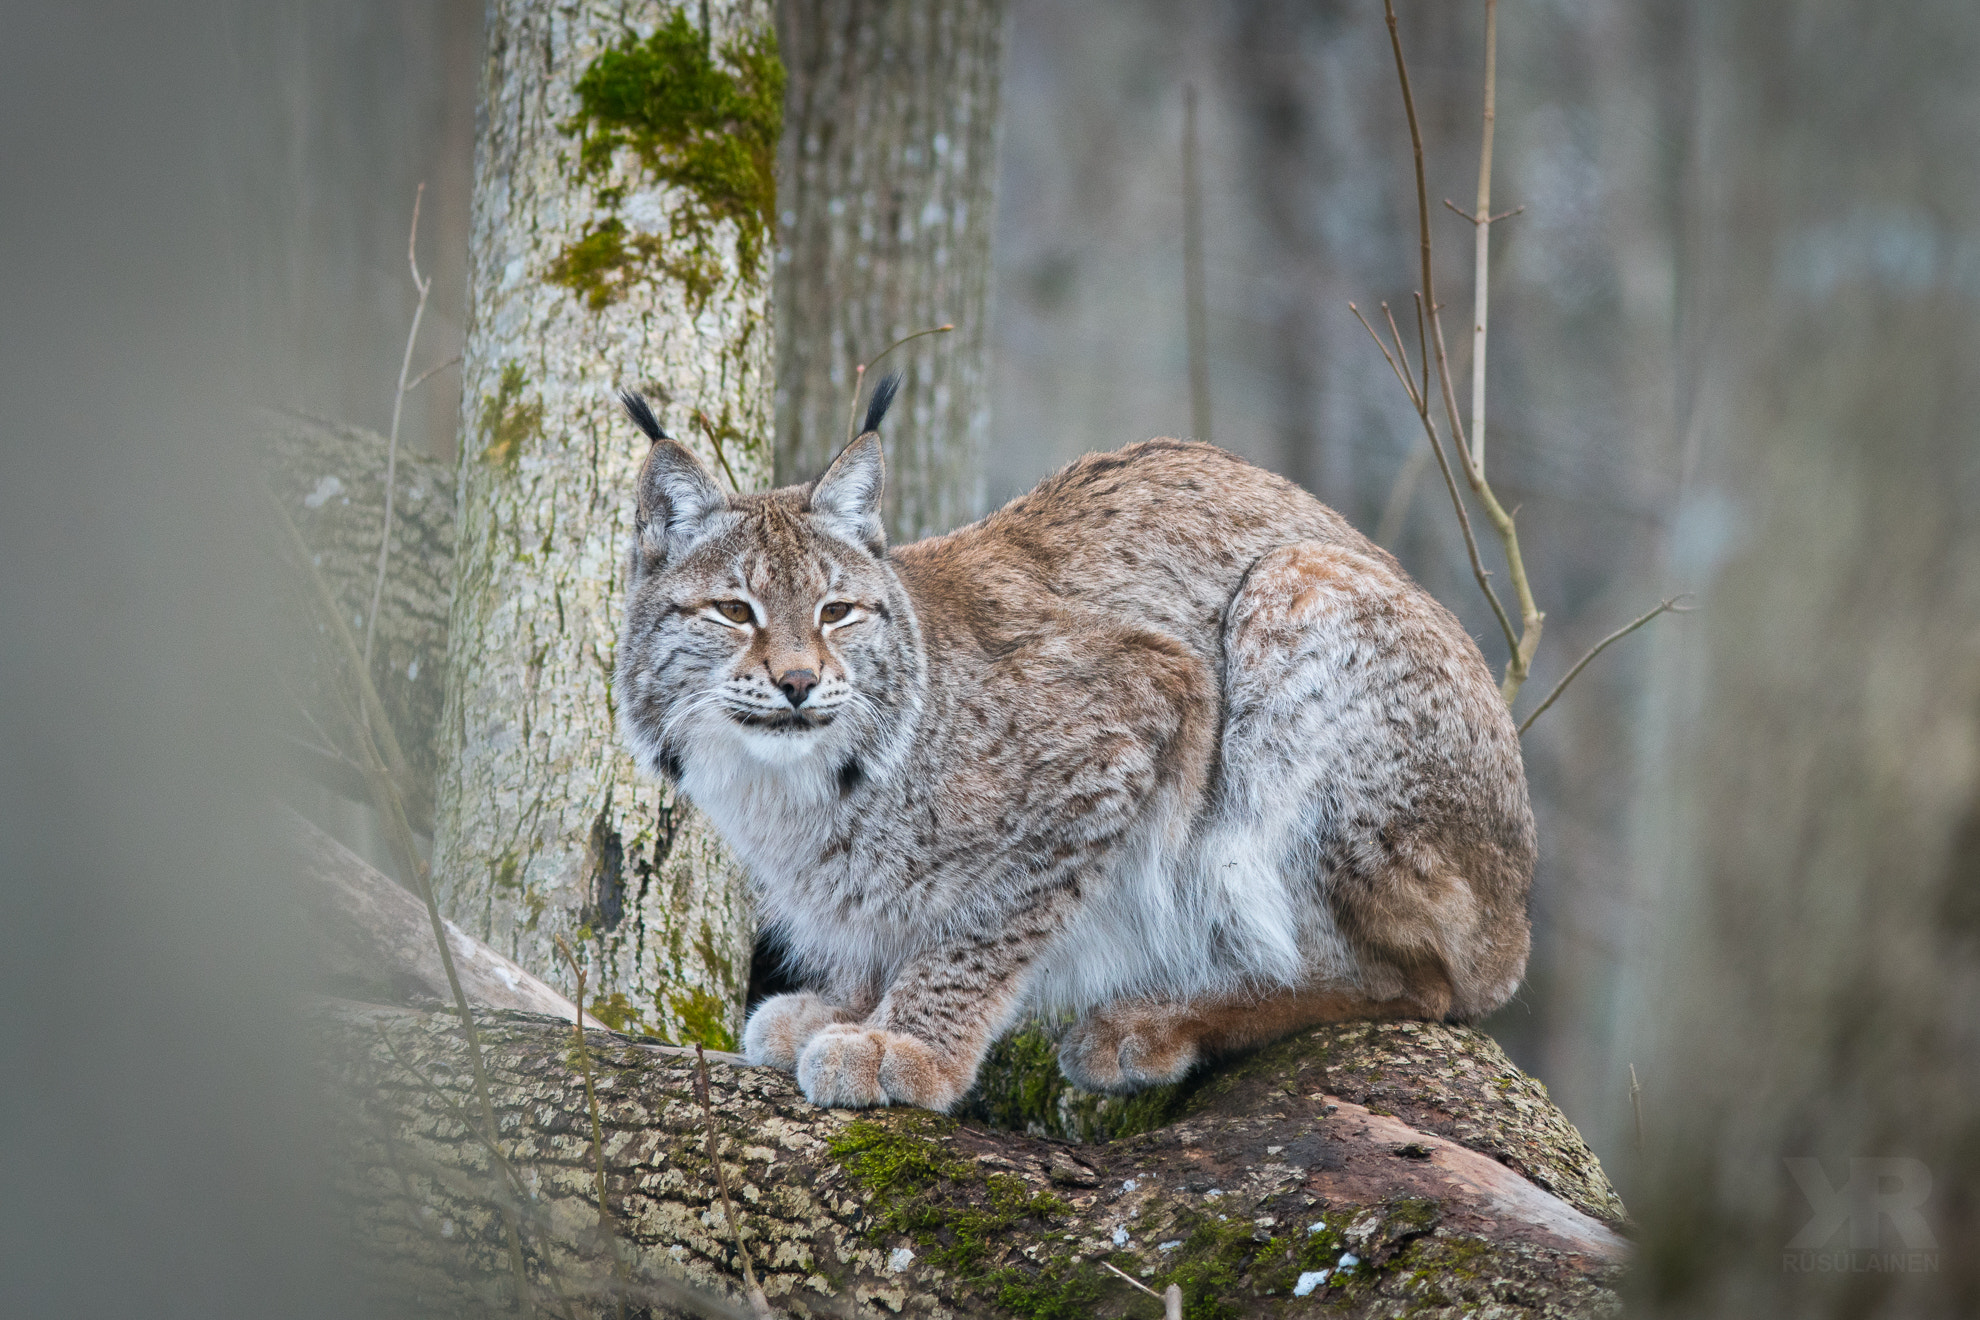 Sony a6300 sample photo. The lynx is waiting visitors in animal park photography